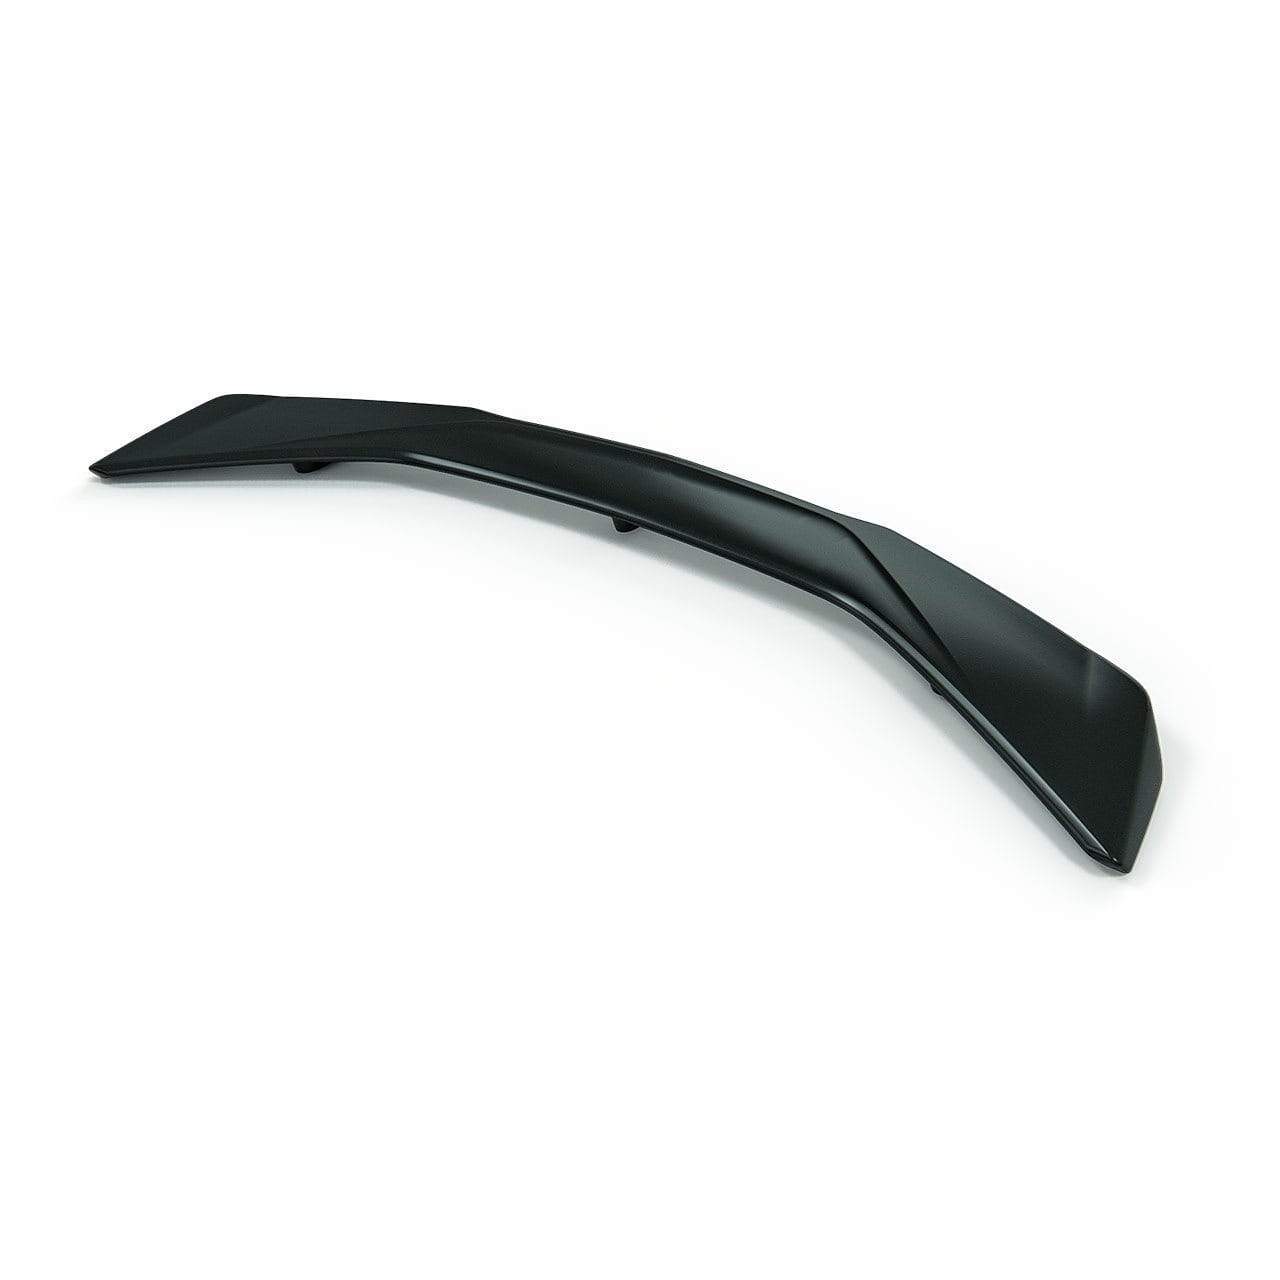 ACS Composite ZL1 Rear Deck Spoiler in Gloss Black [48-4-025]GB8 for Camaro SS - Enhance Performance and Style.